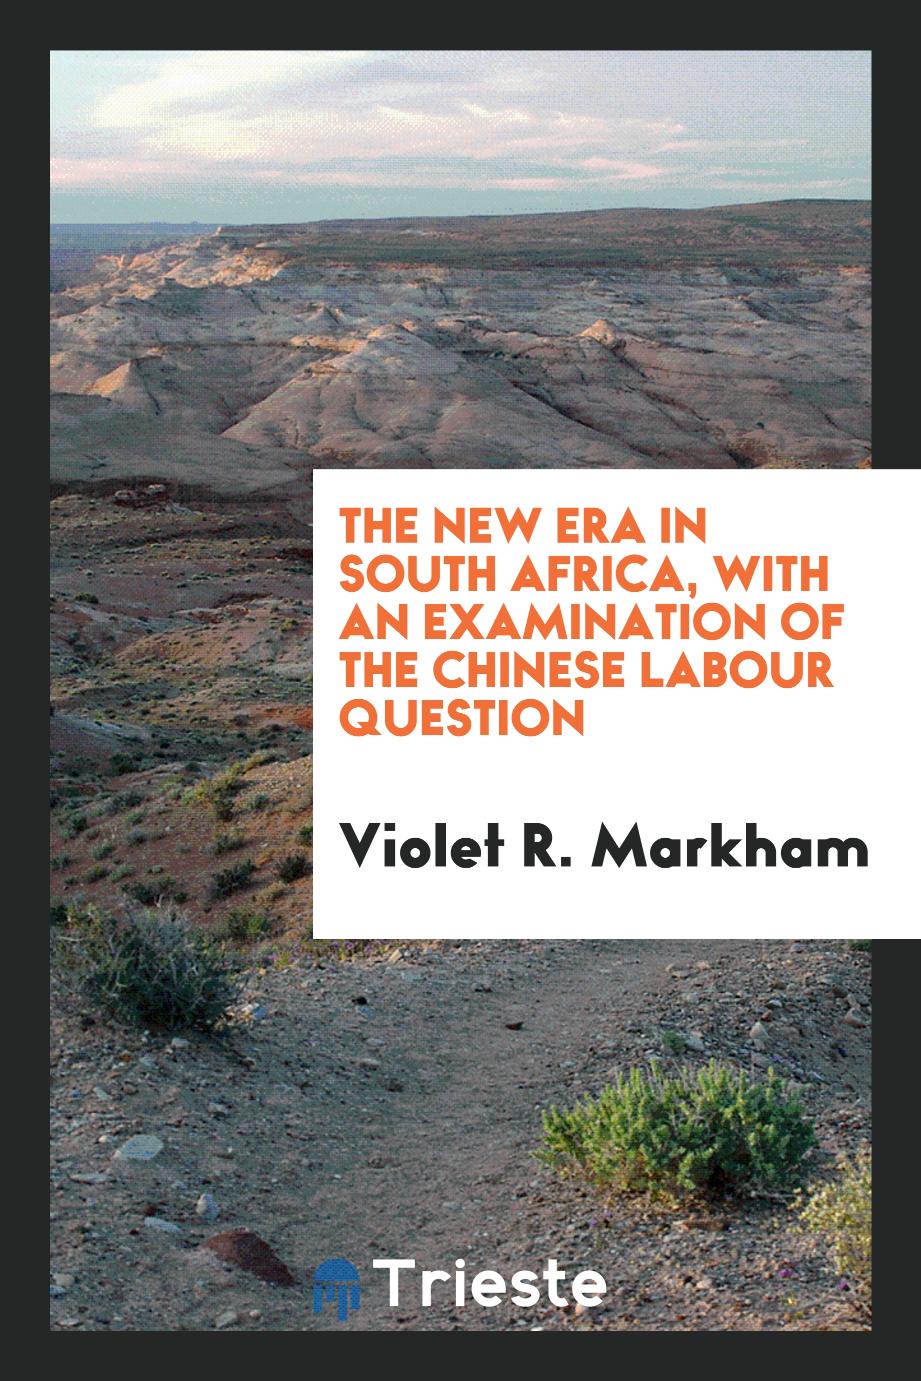 The new era in South Africa, with an examination of the Chinese labour question